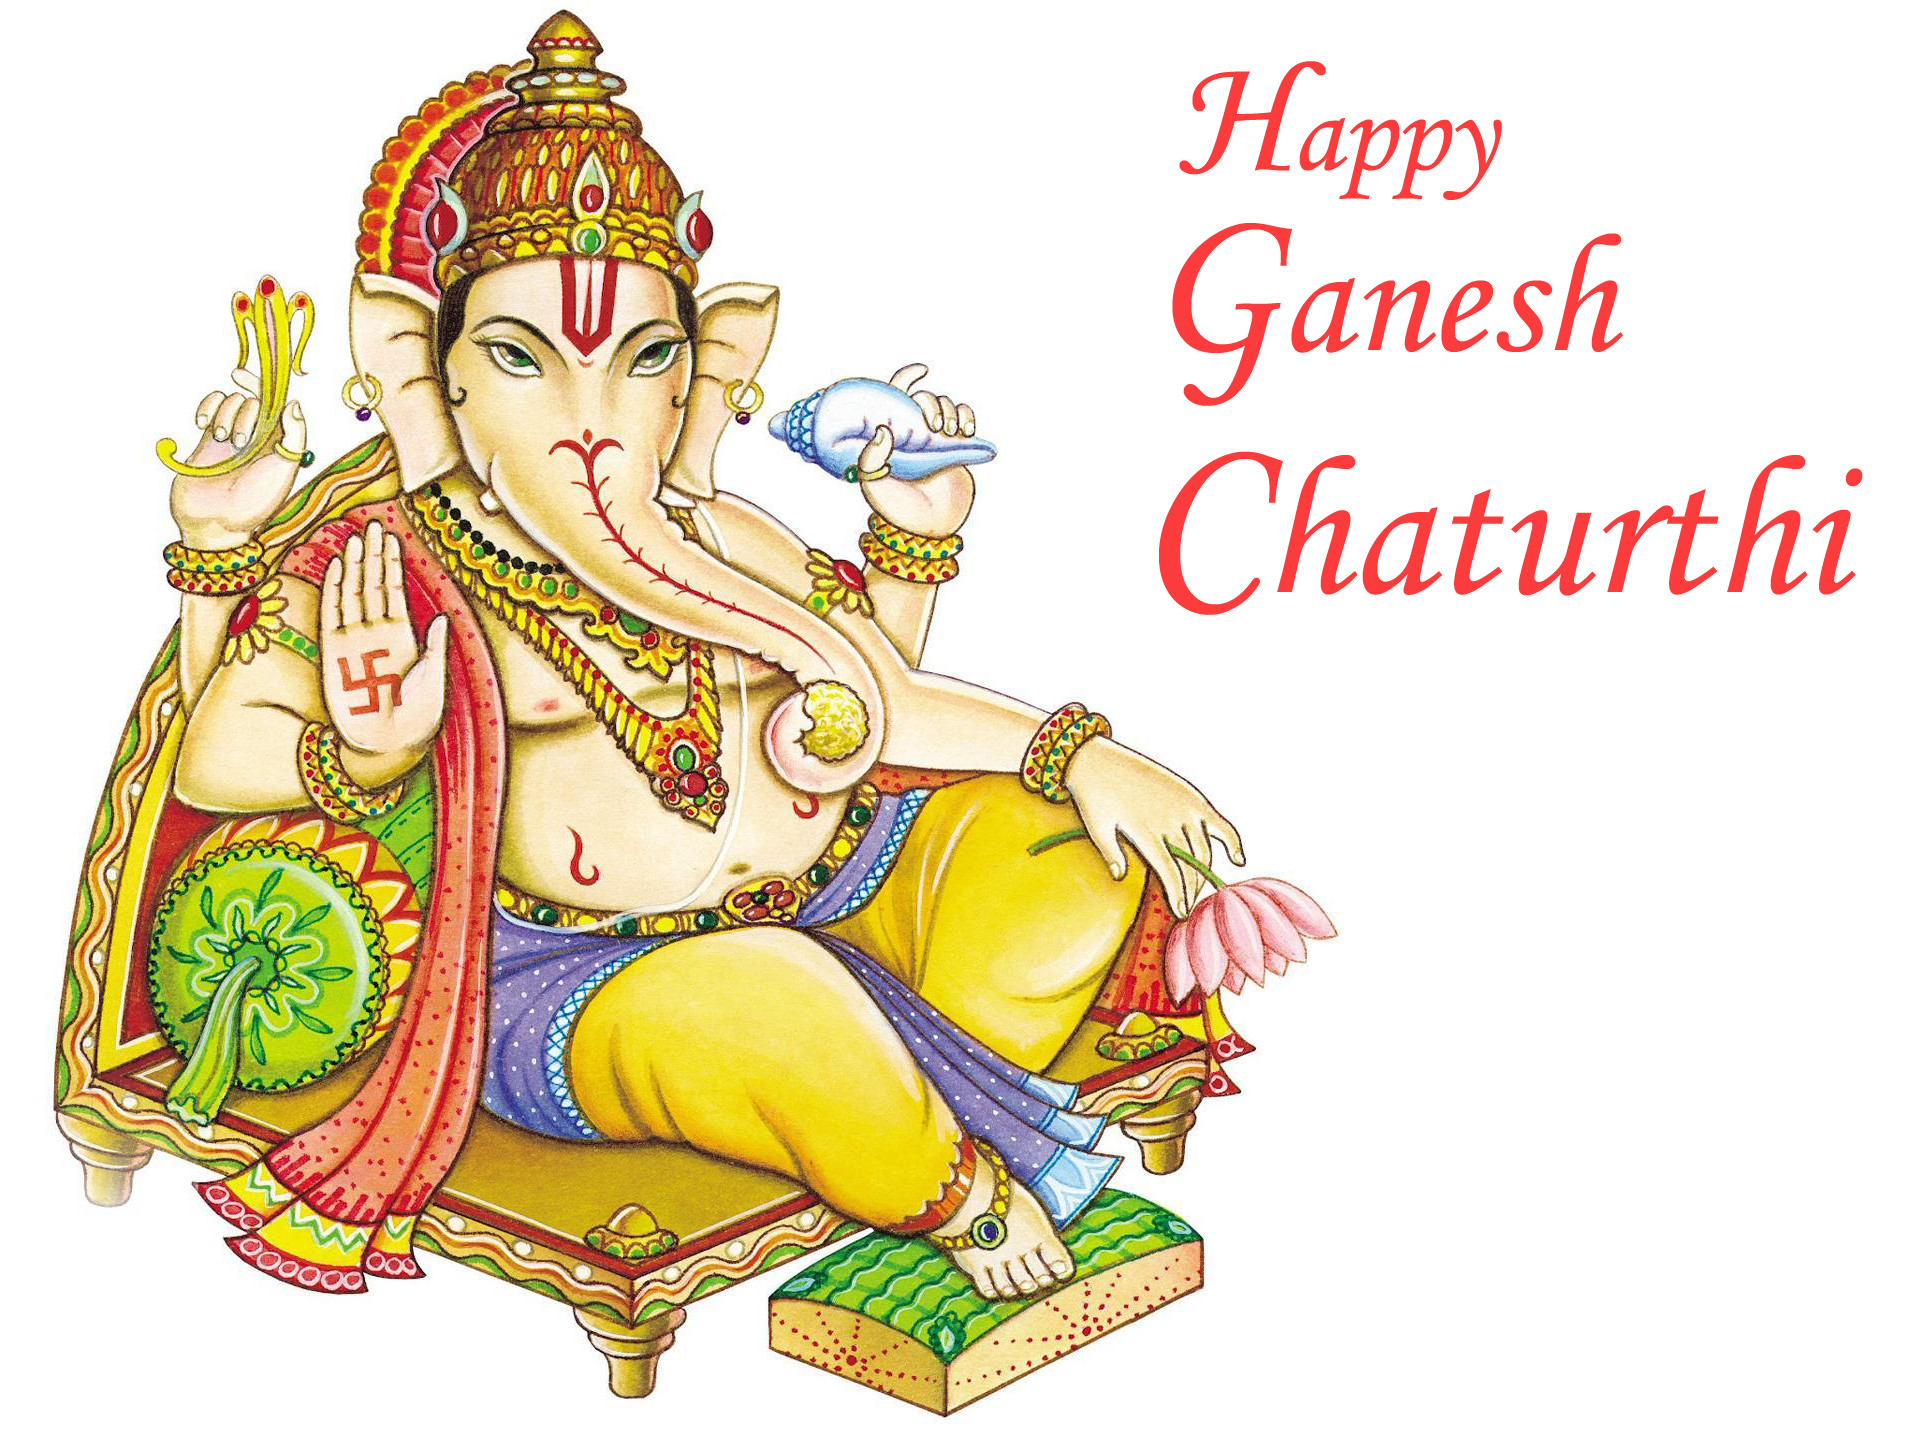 Ganesh Chaturthi Images For Whatsapp Lord Ganesha HD Wallpapers Free Pictures Photos 2017. Happy Ganesh Chaturthi 2017